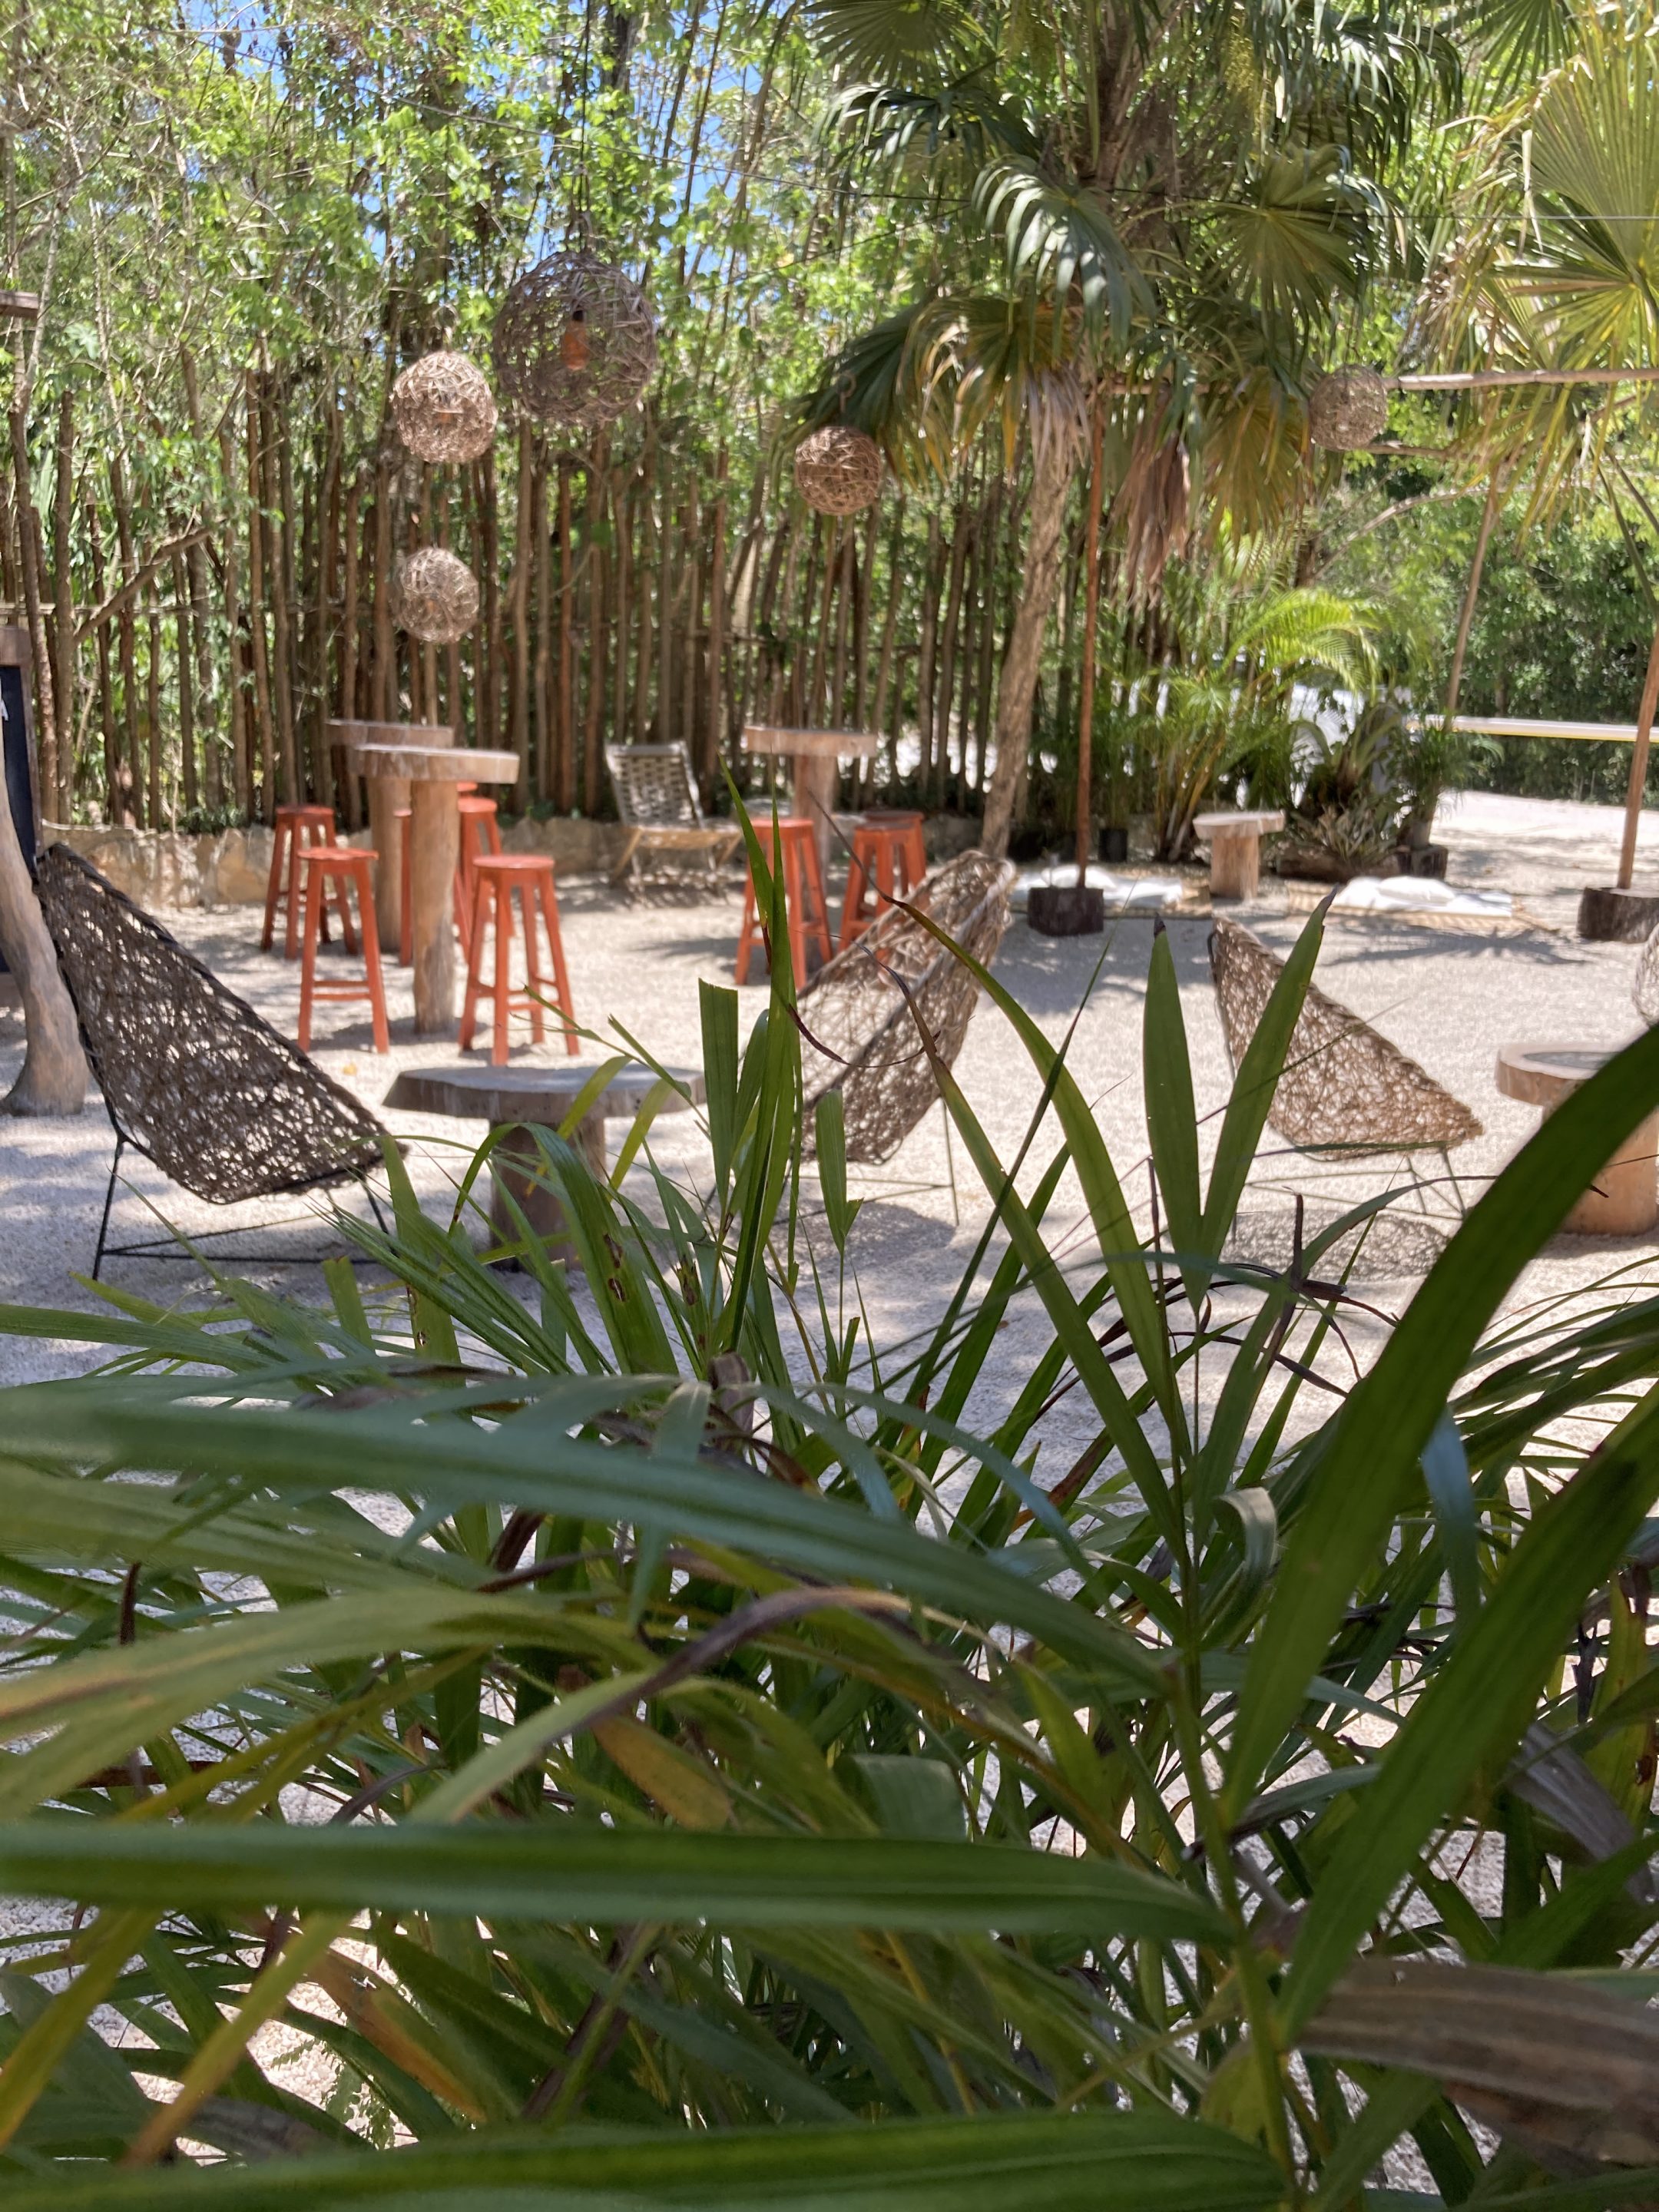 Dine surrounded by nature at Fuegos de Xul-Ha in the Mayan jungle on the Ruta de Cenotes outside Puerto Morelos.